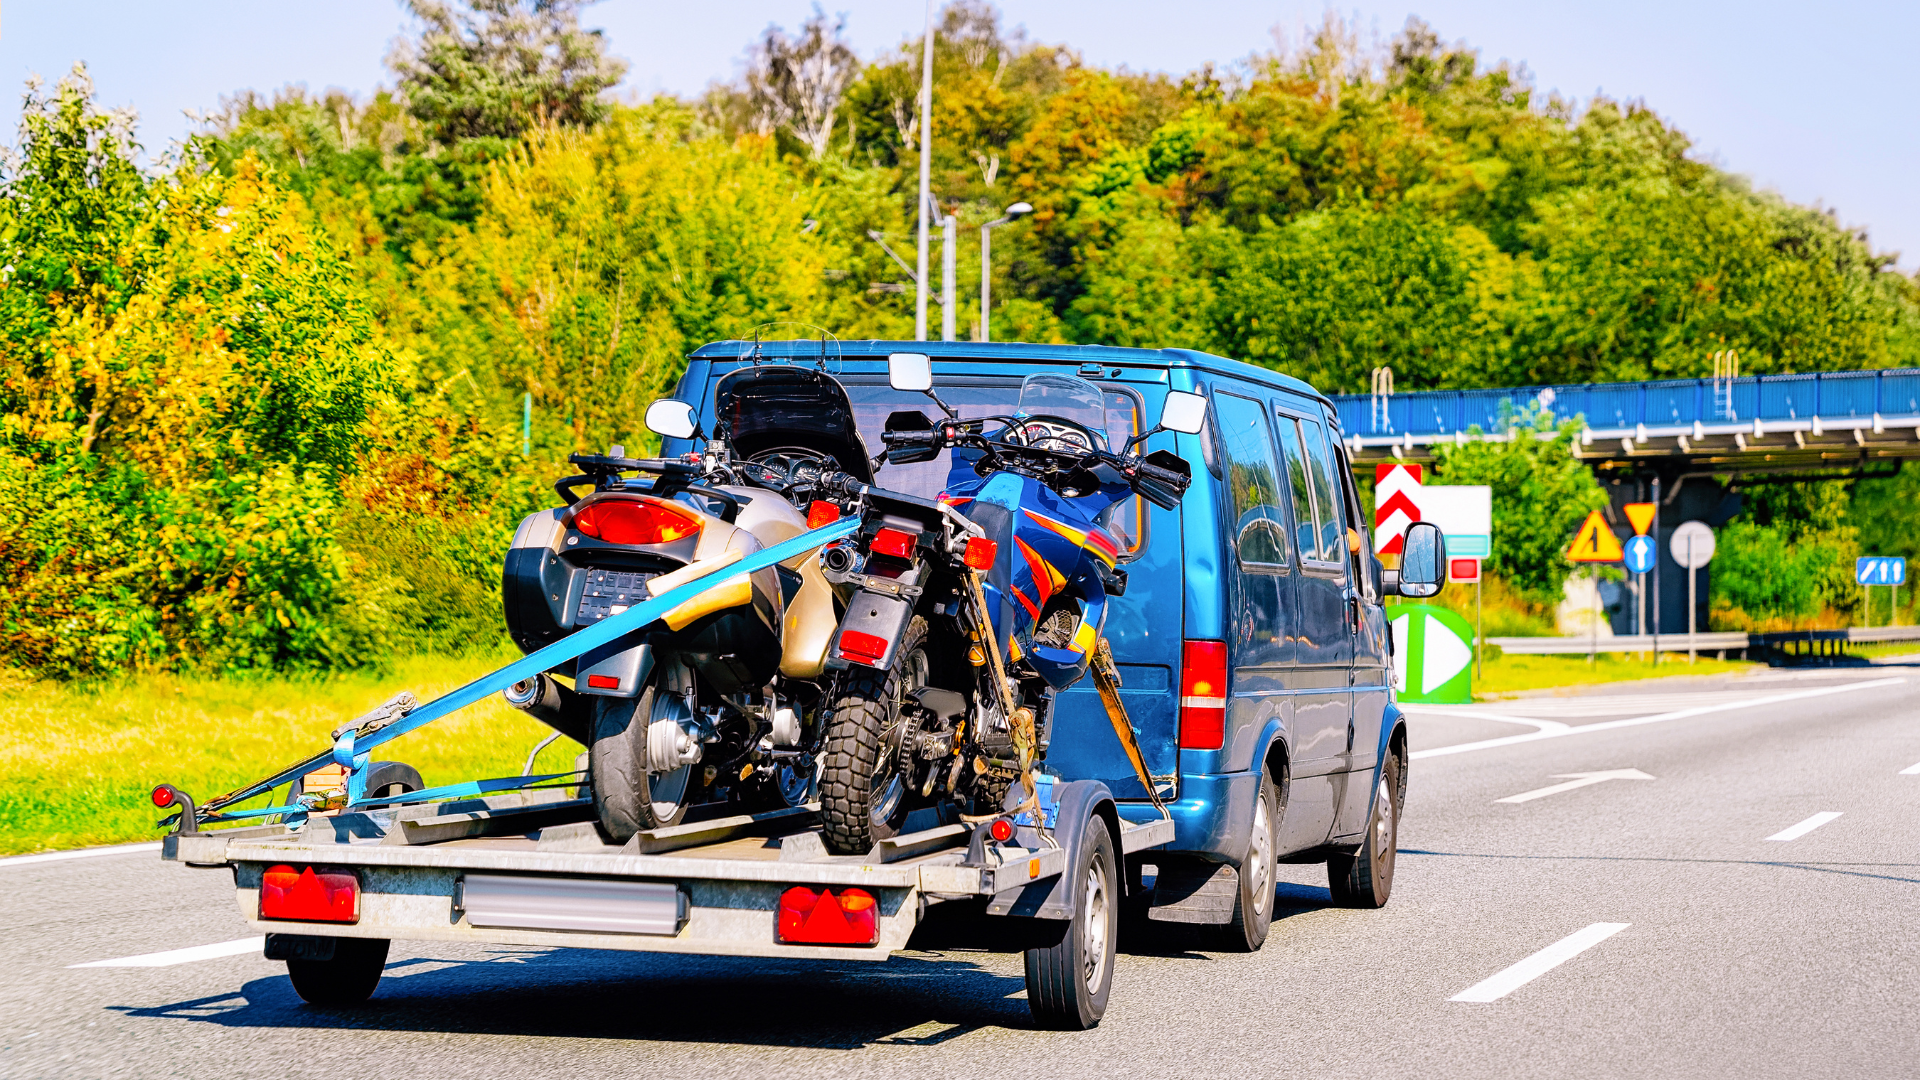 Transport motorcycle on trailer